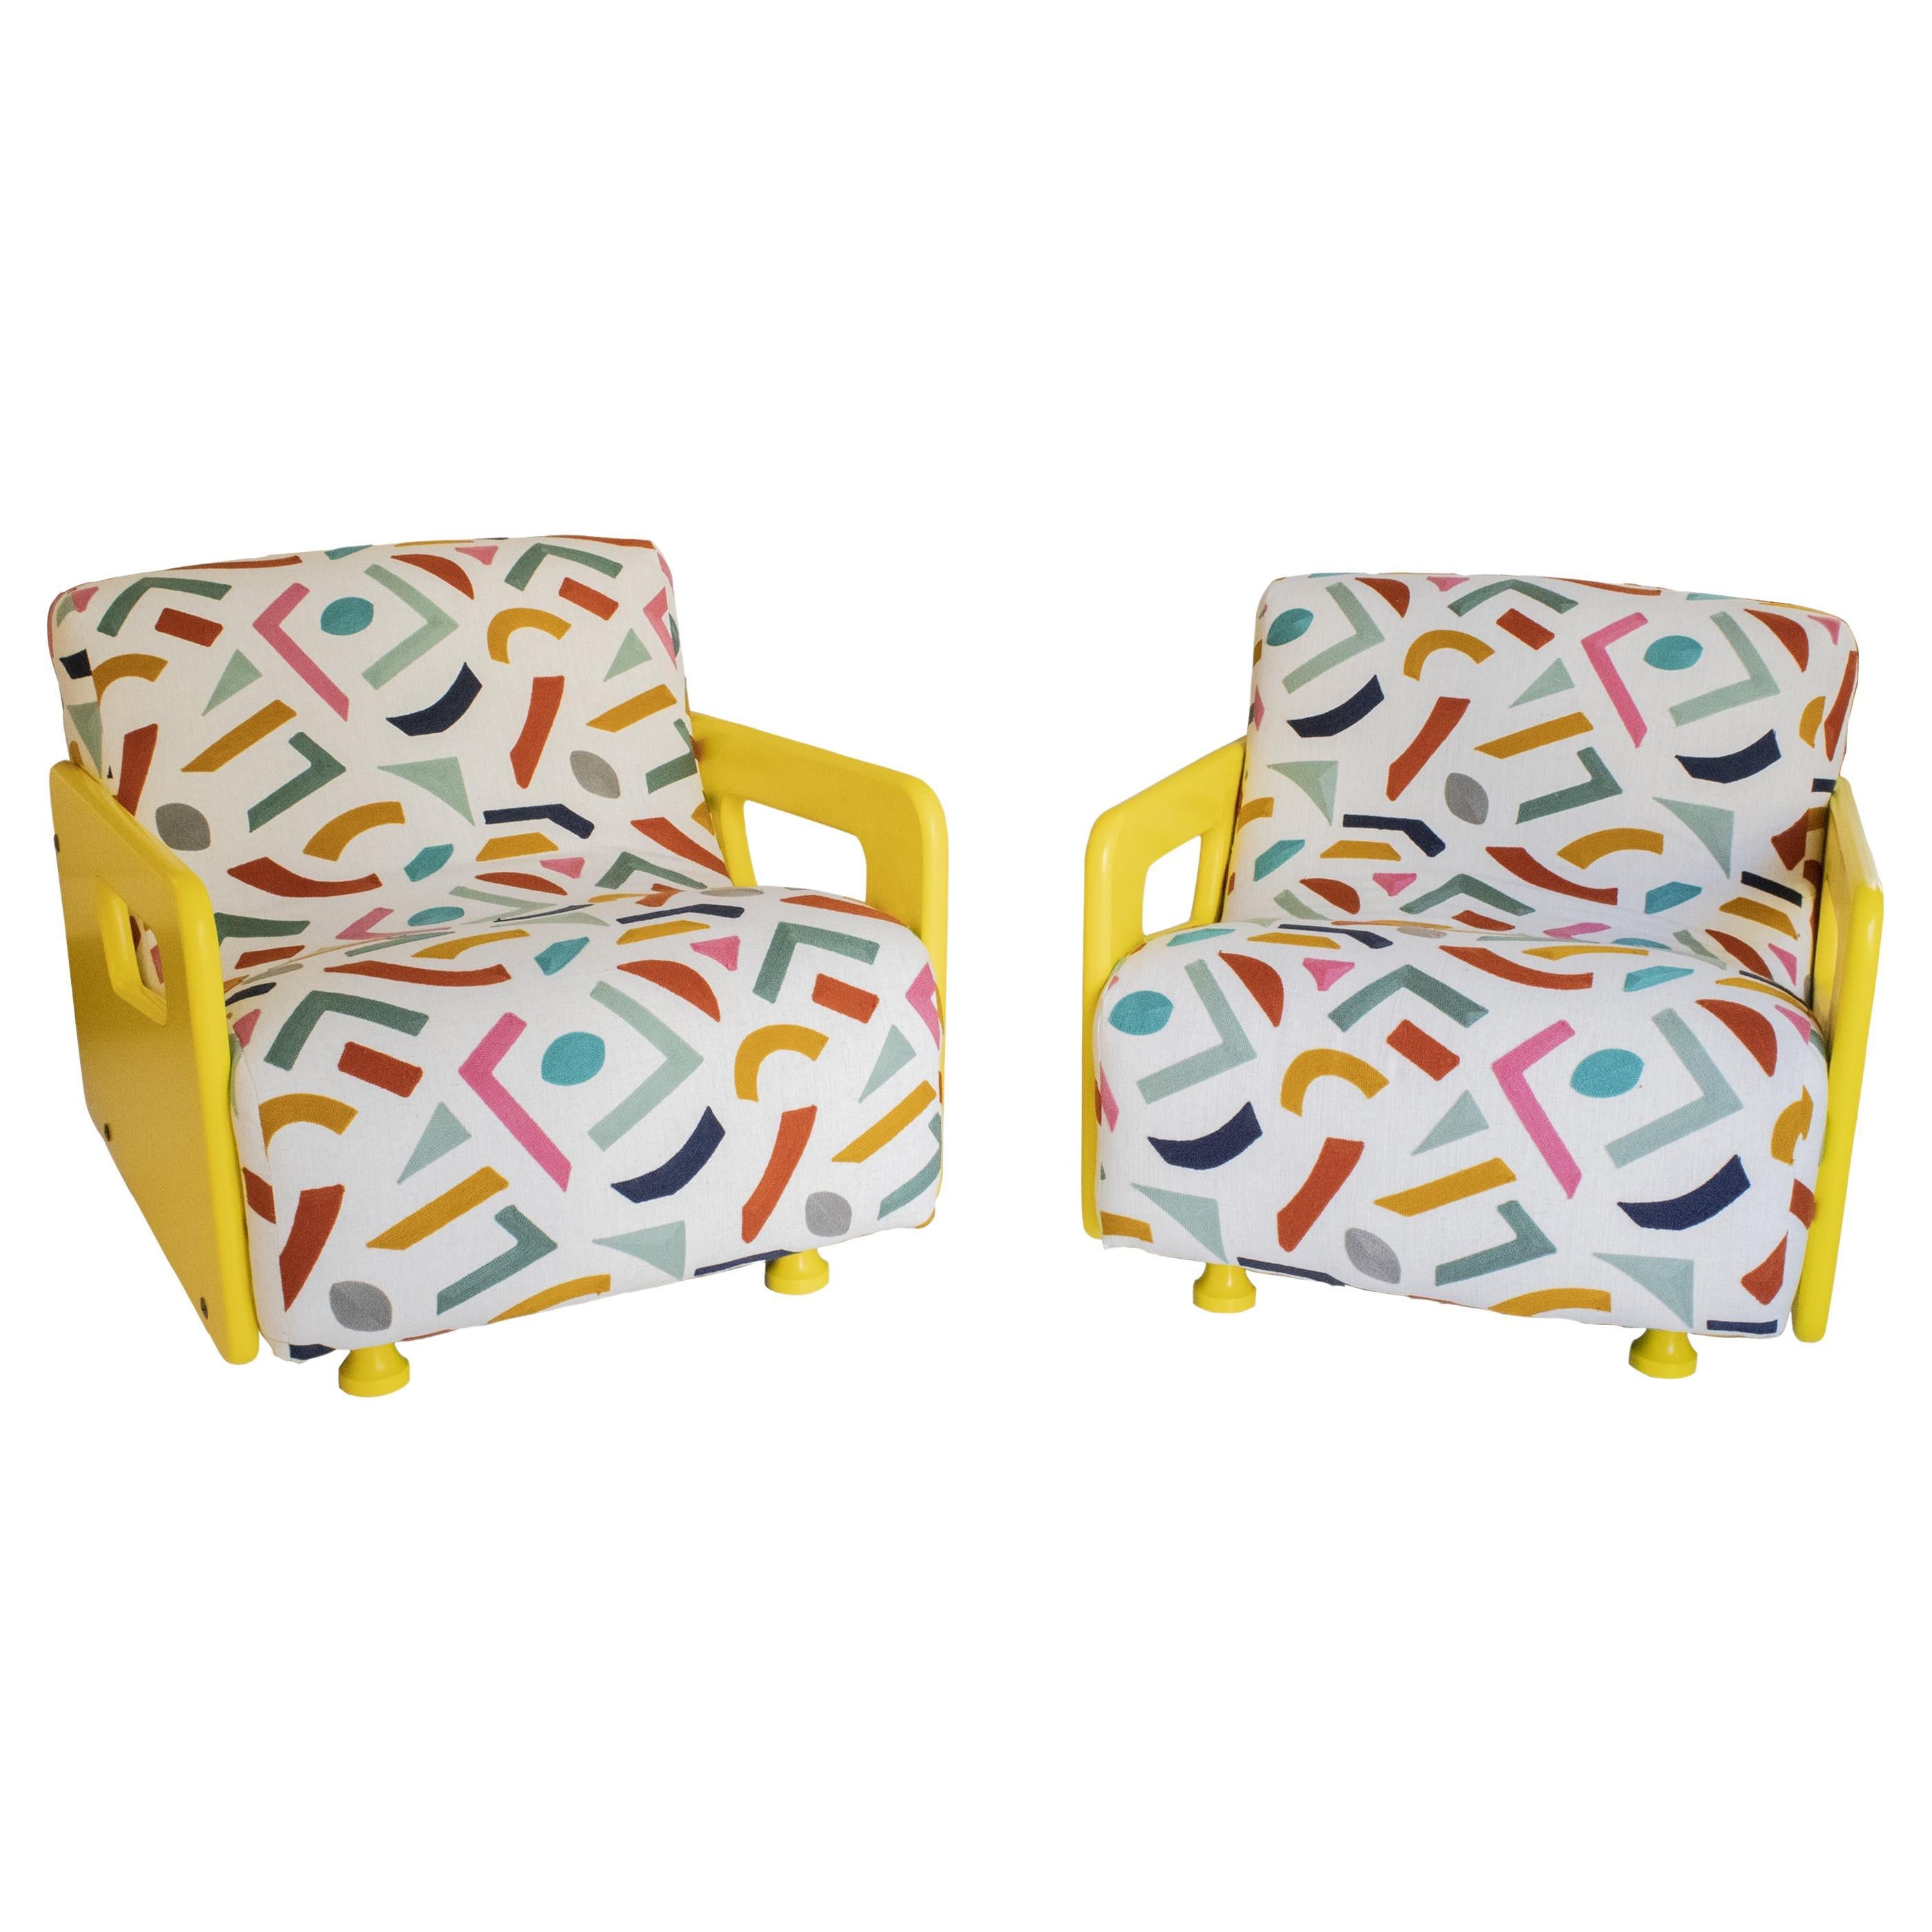 Modern Armchairs with Lacquered Wood and Geometric Upholstery, Italy, 1970